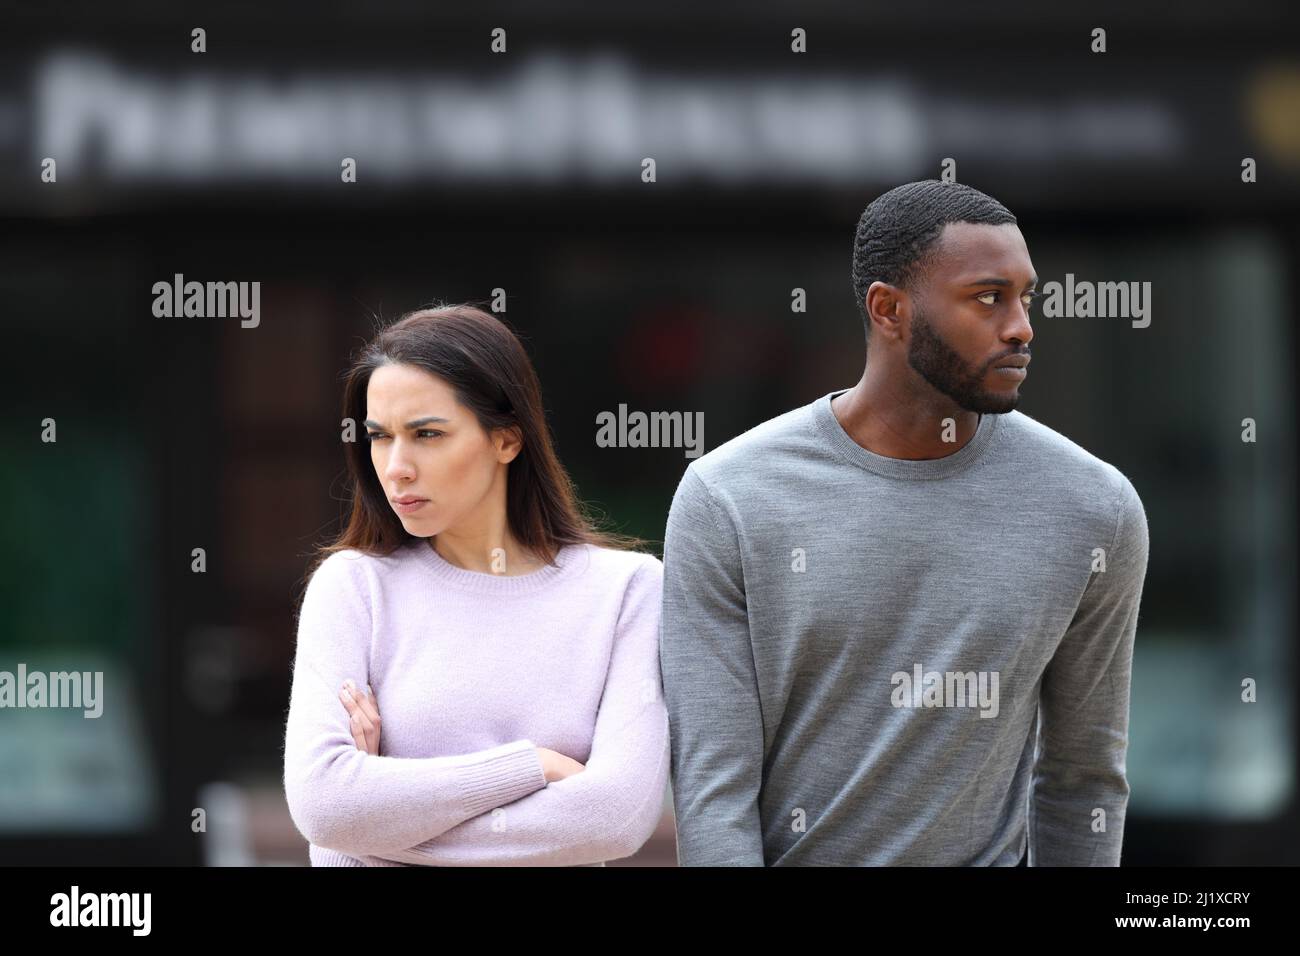 Front view portrait of an angry interracial couple ignoring each other walking in the street Stock Photo